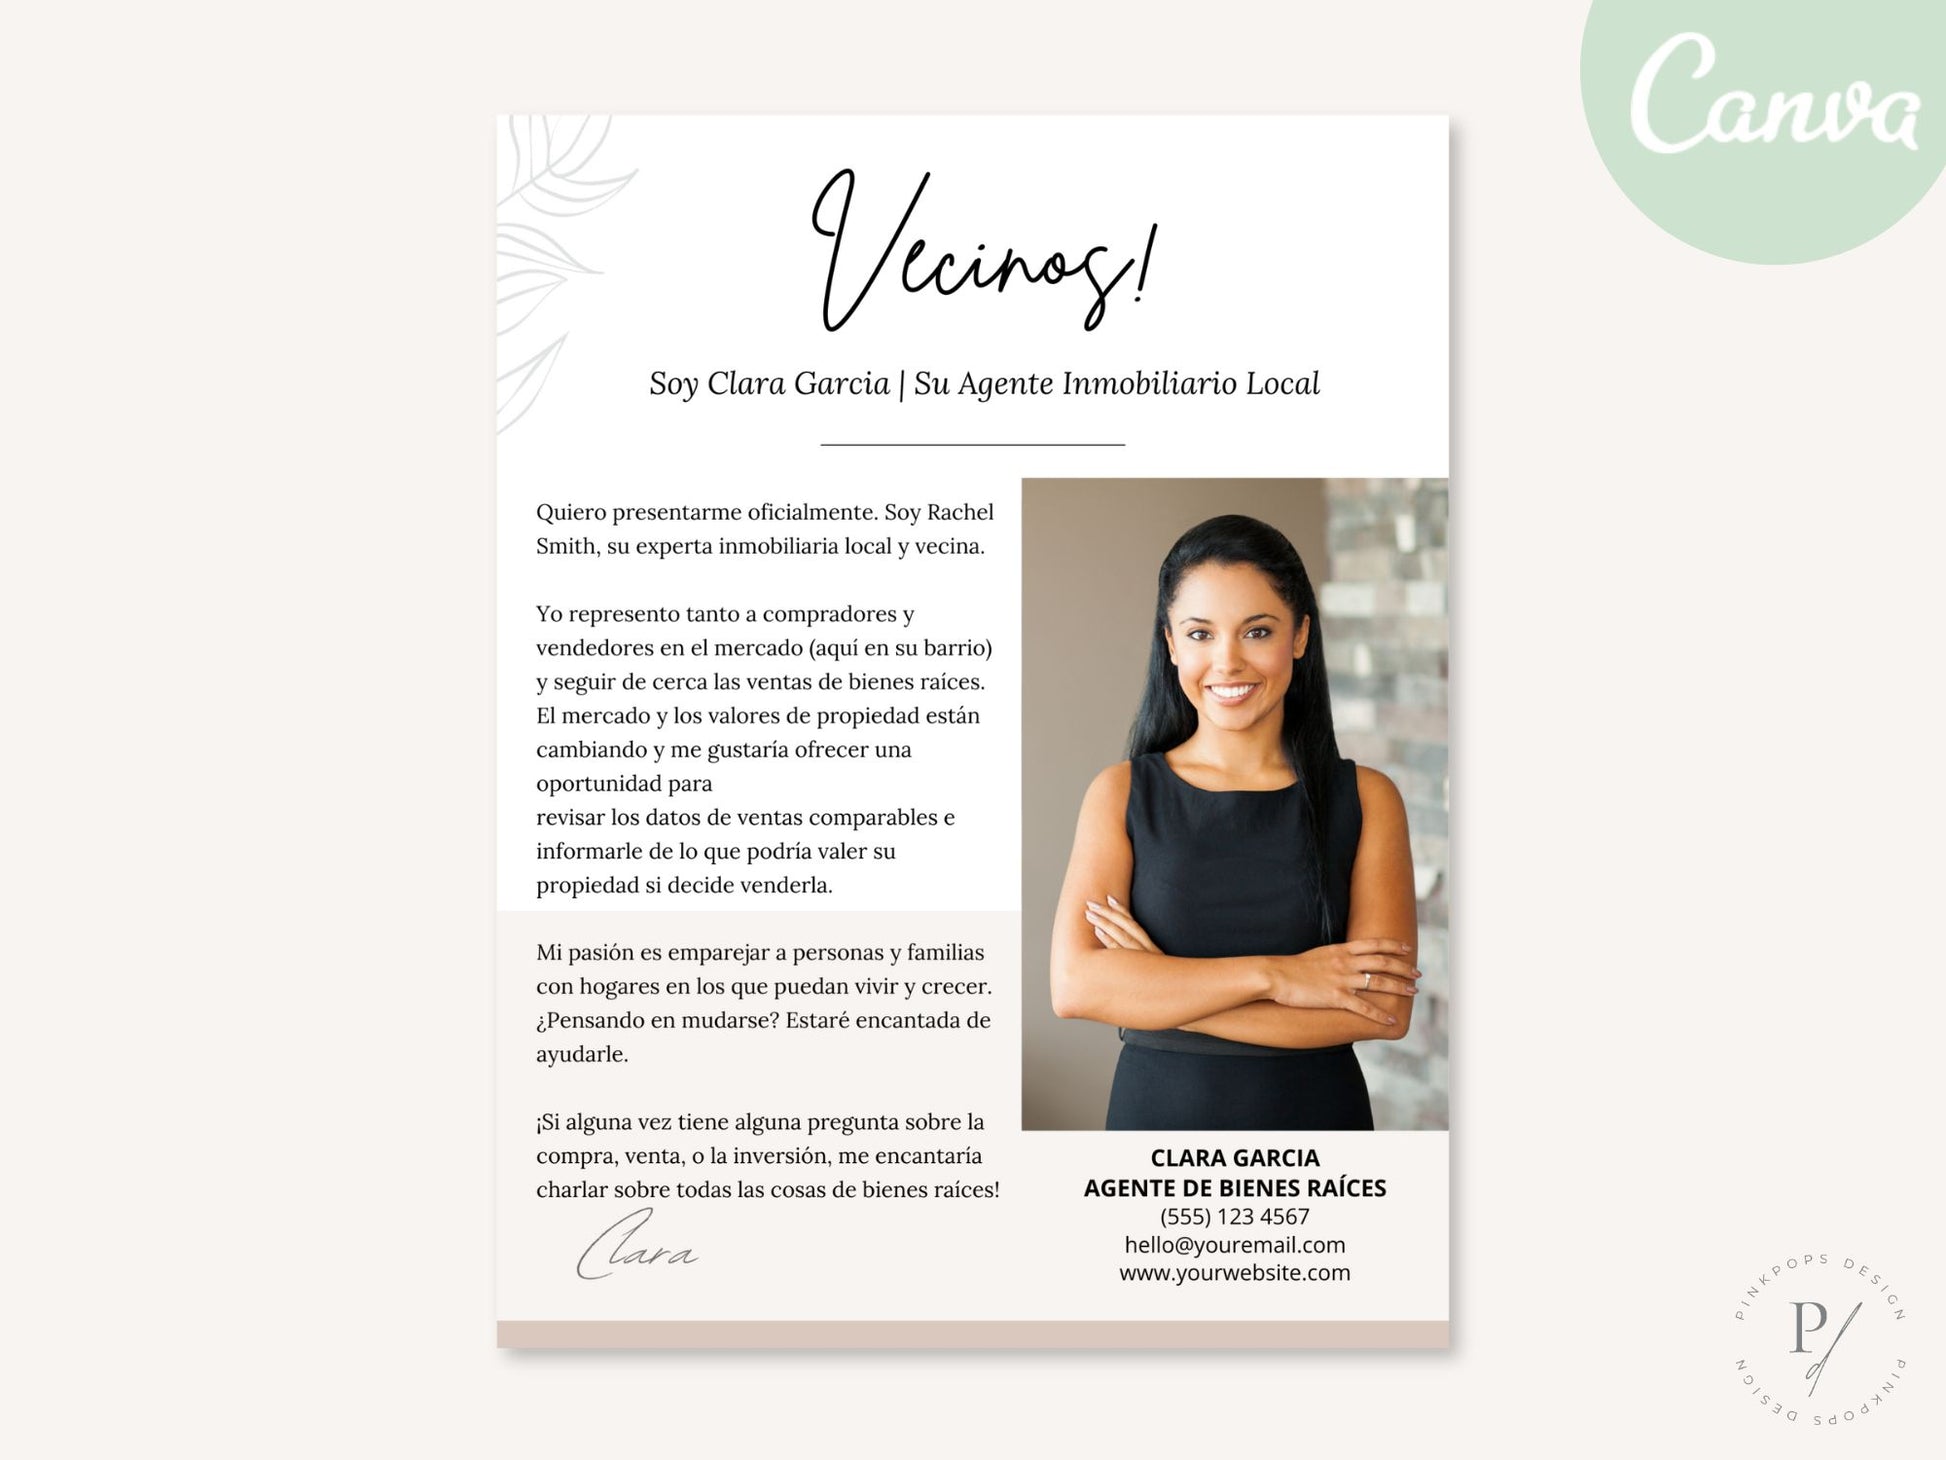 Real Estate 'Hello Neighbors' Letter in Spanish Vol. 02 - Connect effectively with your community by introducing your real estate services with this personalized digital letter.